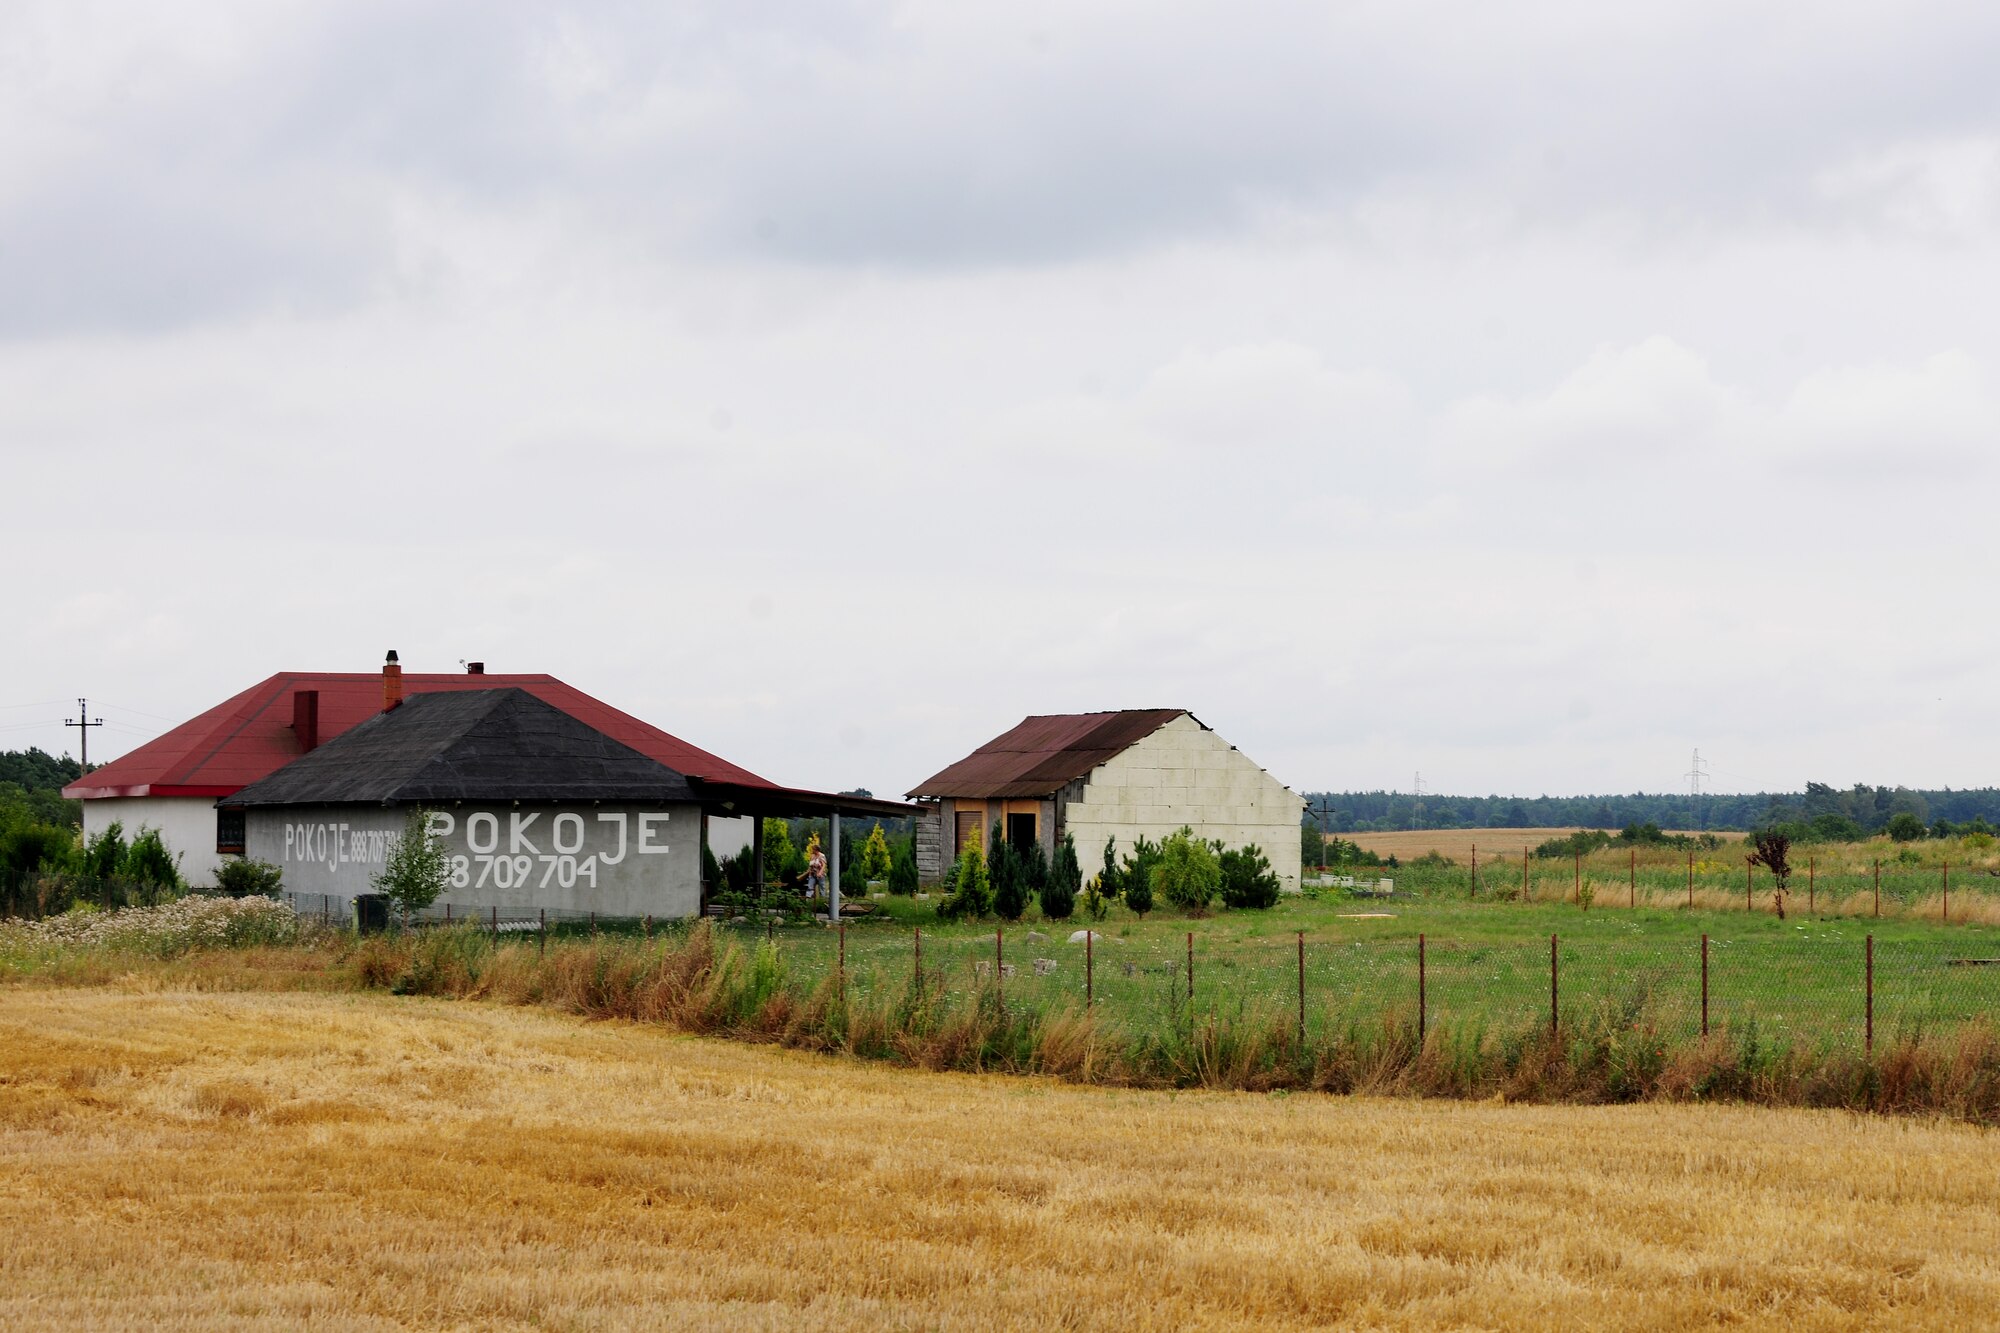 A house sits on an expanse of farmland along the road to Powidz Air Base, Poland, Aug. 1, 2014. U.S. Air Force Airmen have deployed to the country as part of a flying training deployment designed to enhance regional security and stability. (U.S. Air Force photo by Staff Sgt. Jarad A. Denton/Released)